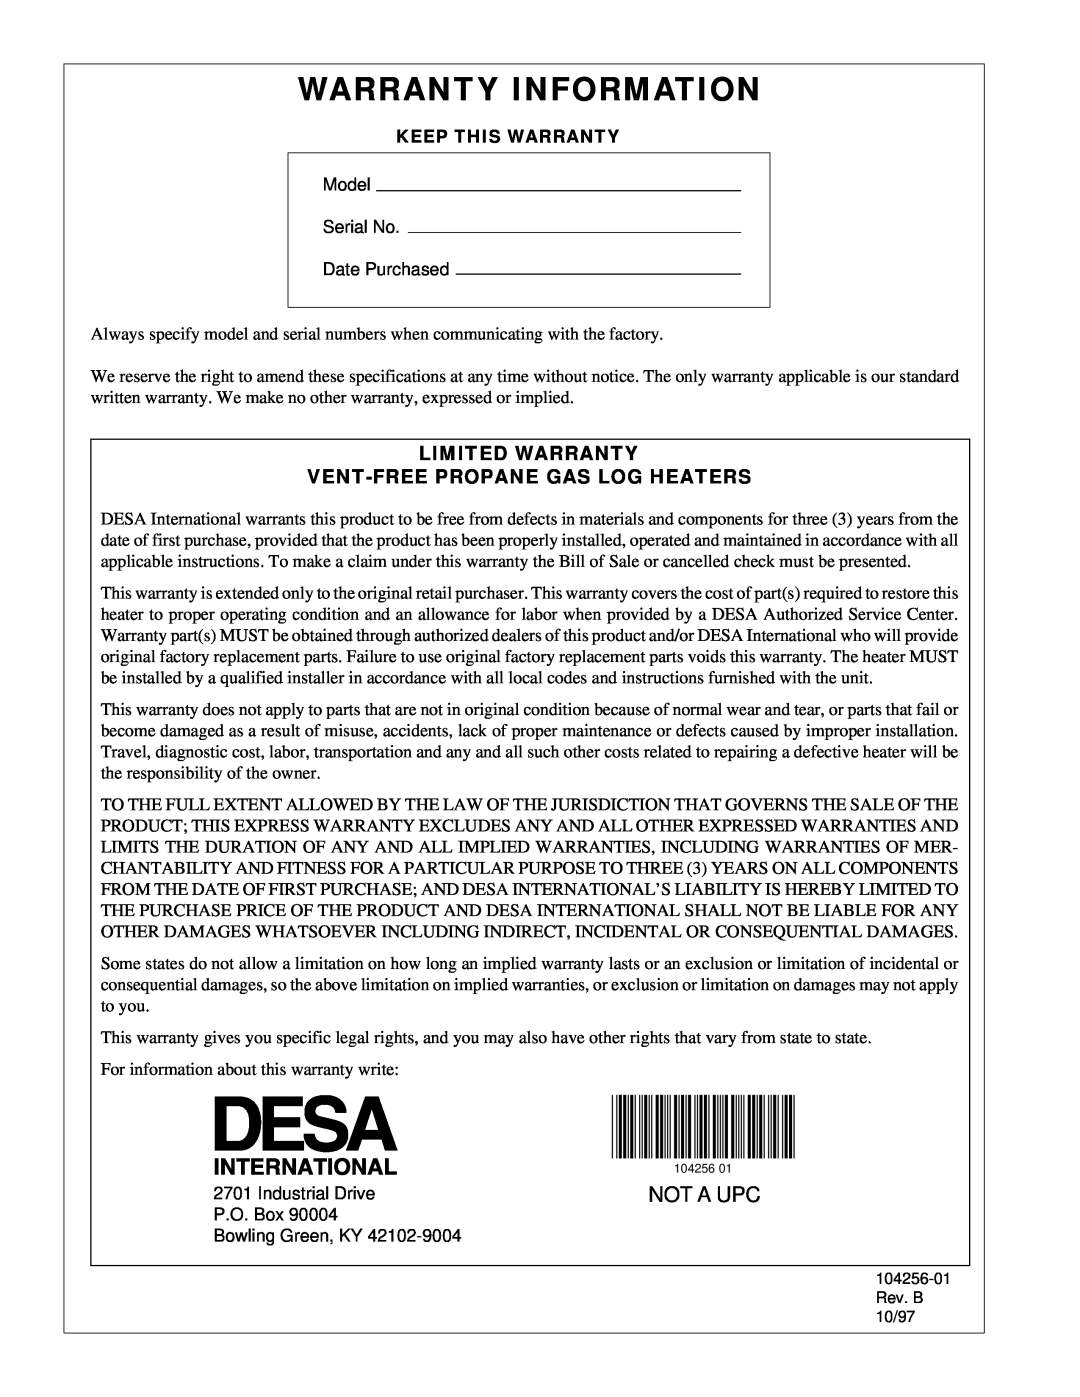 Desa UNVENTED (VENT-FREE) PROPANE/LP GAS LOG HEATER installation manual Warranty Information, Not A Upc 